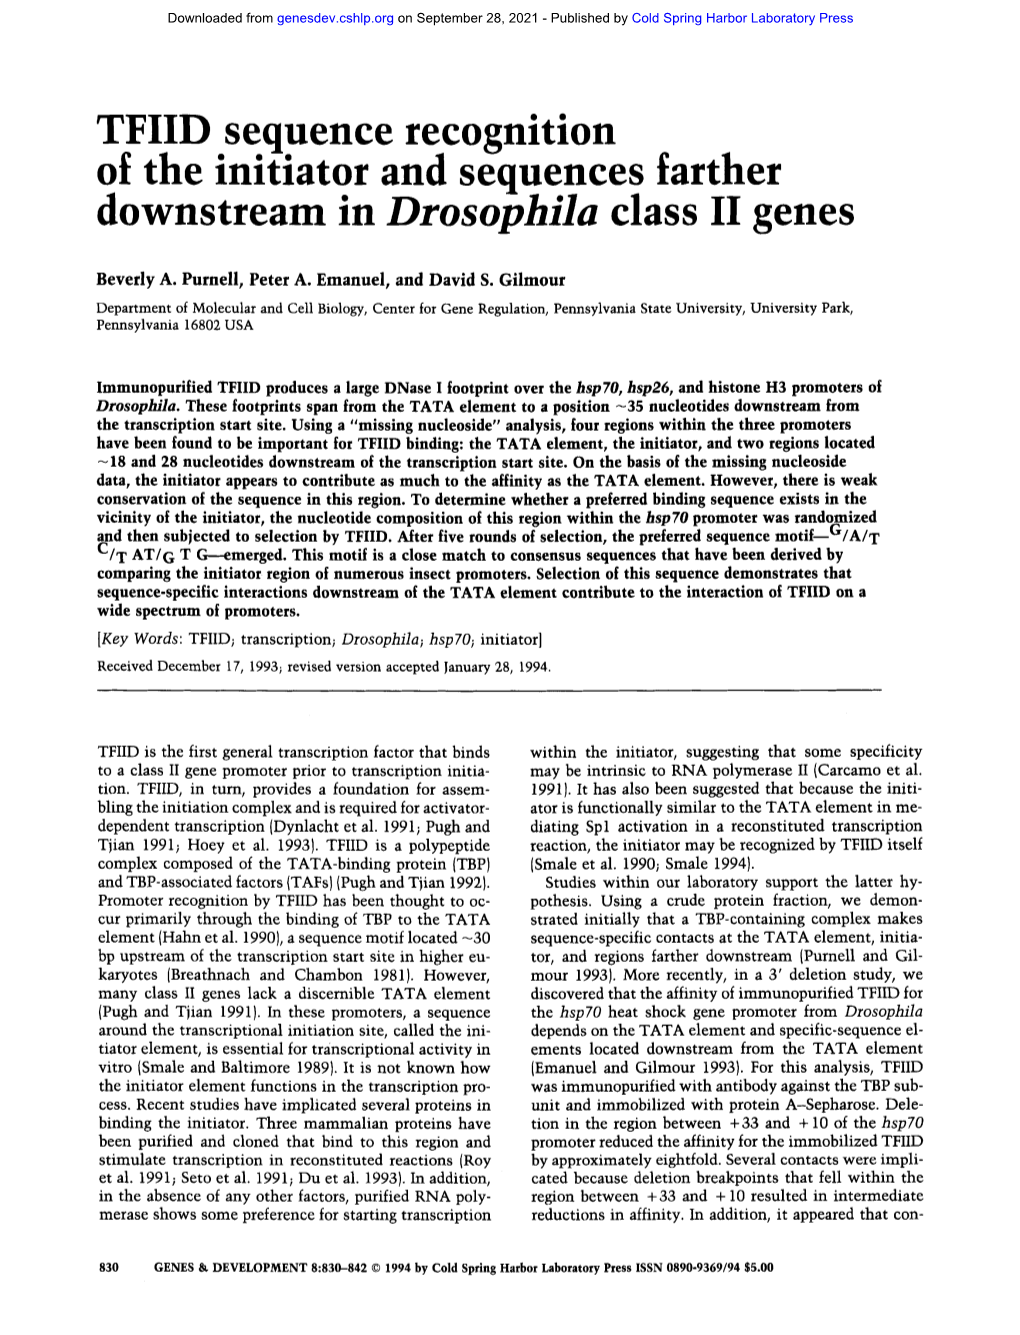 TFIID Sequence Recognition of the Initiator and Sequences Farther Downstream in Drosophila Class II Genes